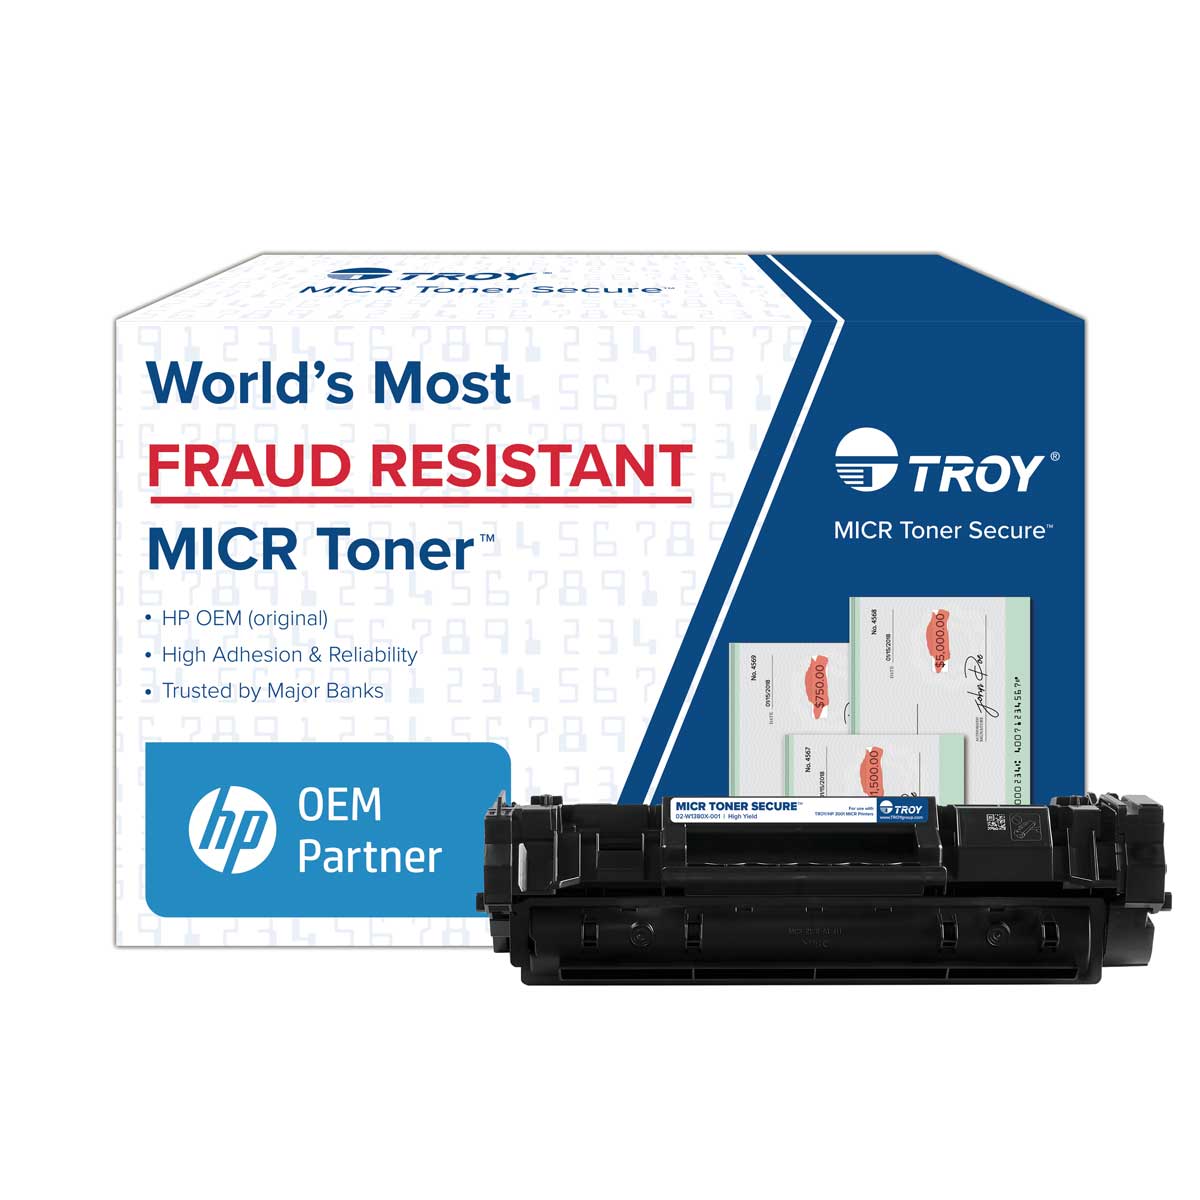 TROY 3001 MICR Toner Secure High Yield Cartridge (Coordinating HP Part Number: W1380X)